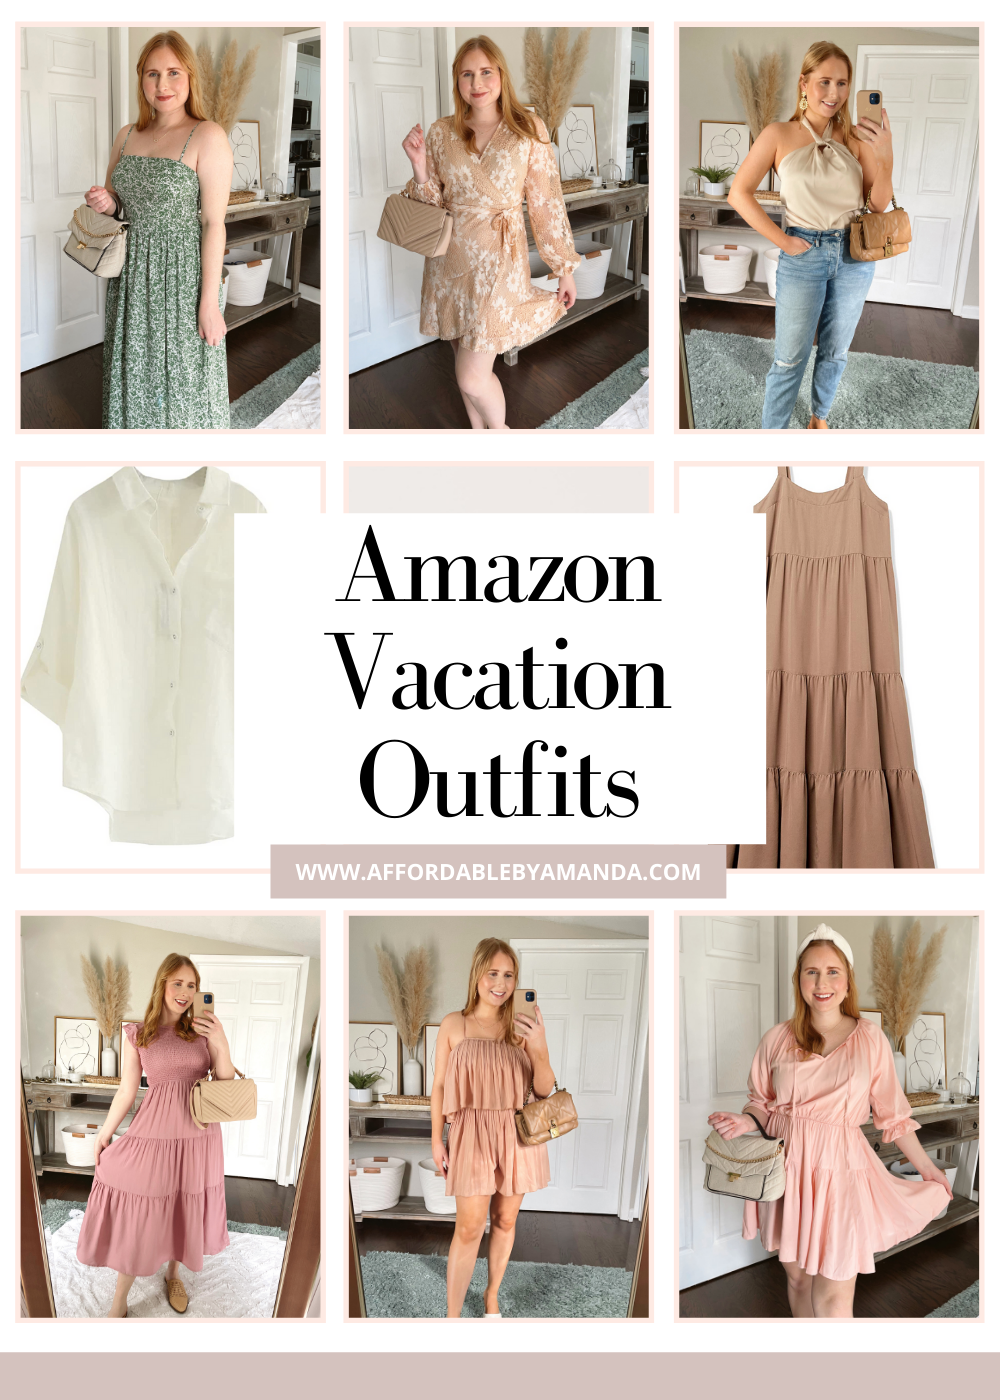 2022 Summer Vacation Outfit Ideas